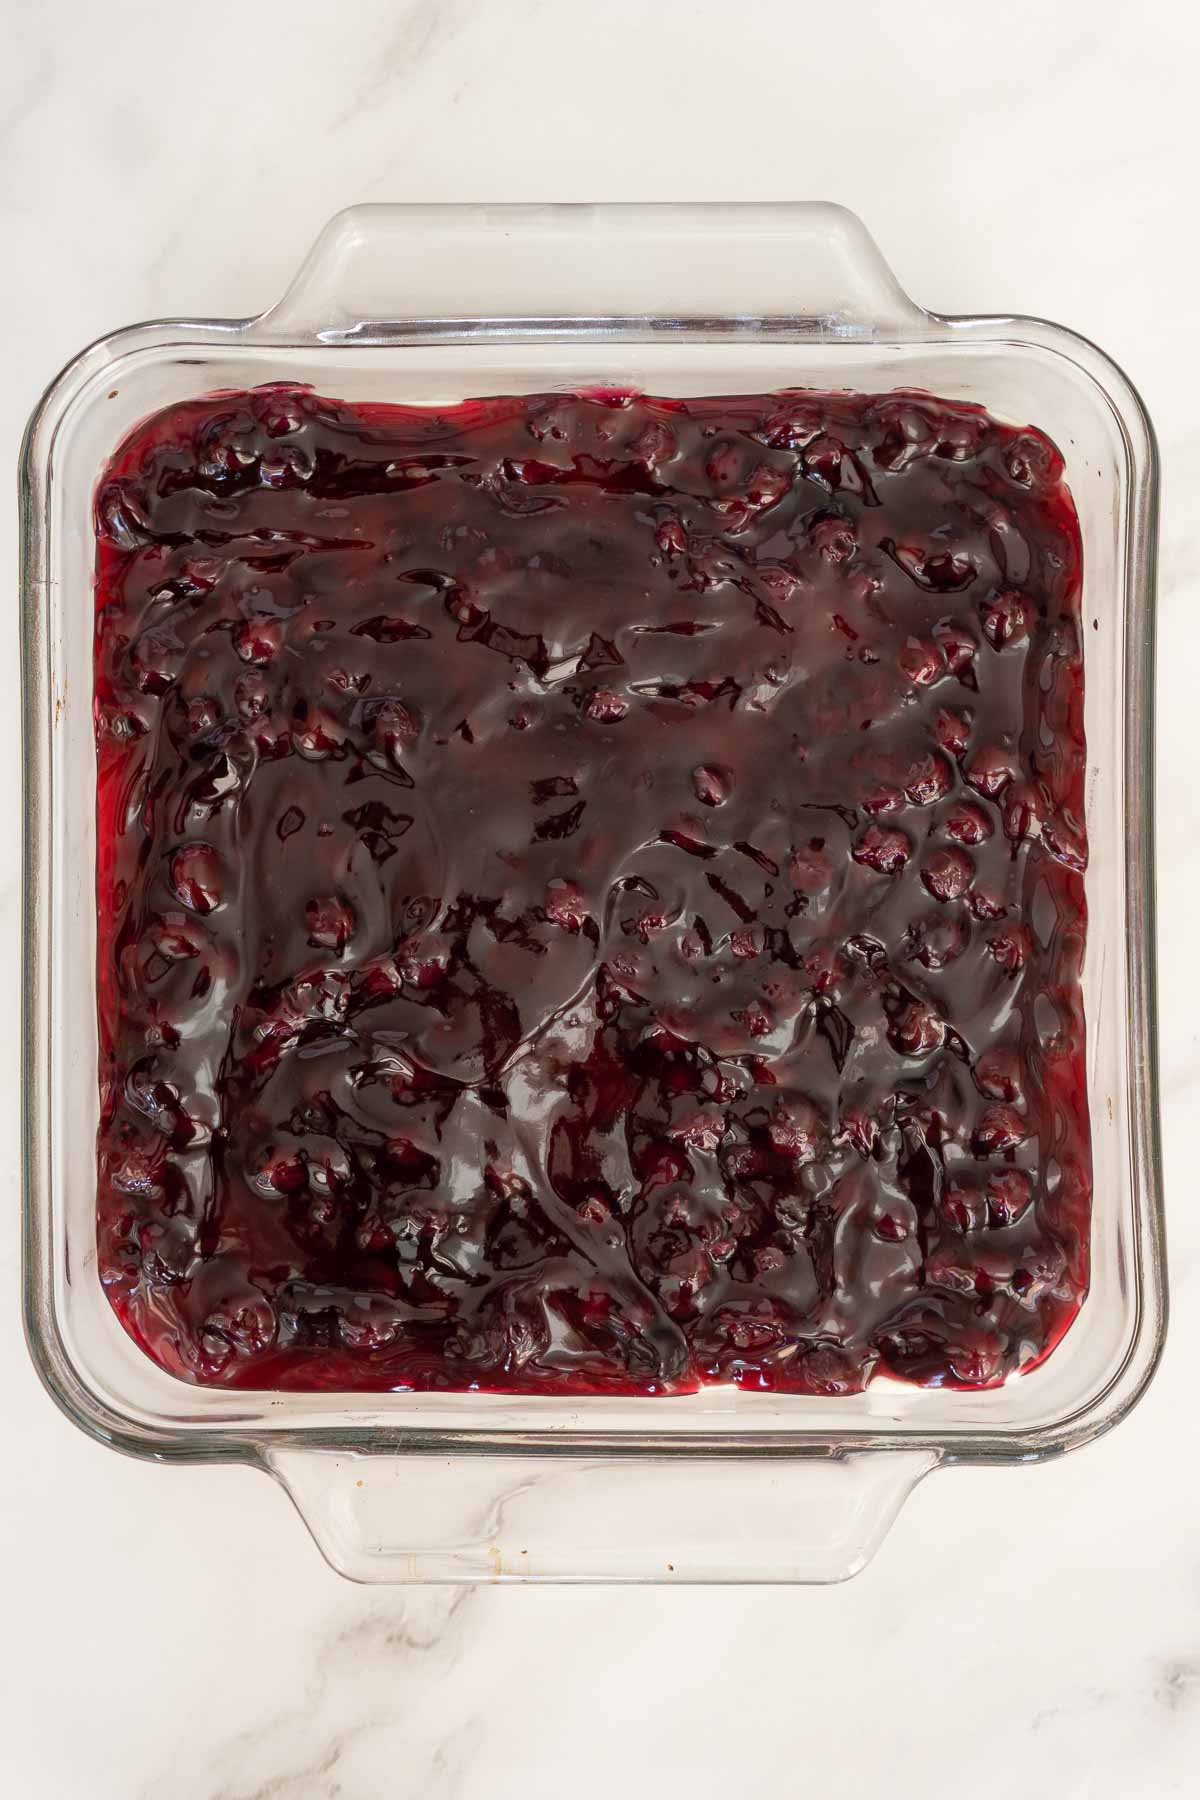 Layer of blueberry pie filling in a baking dish.